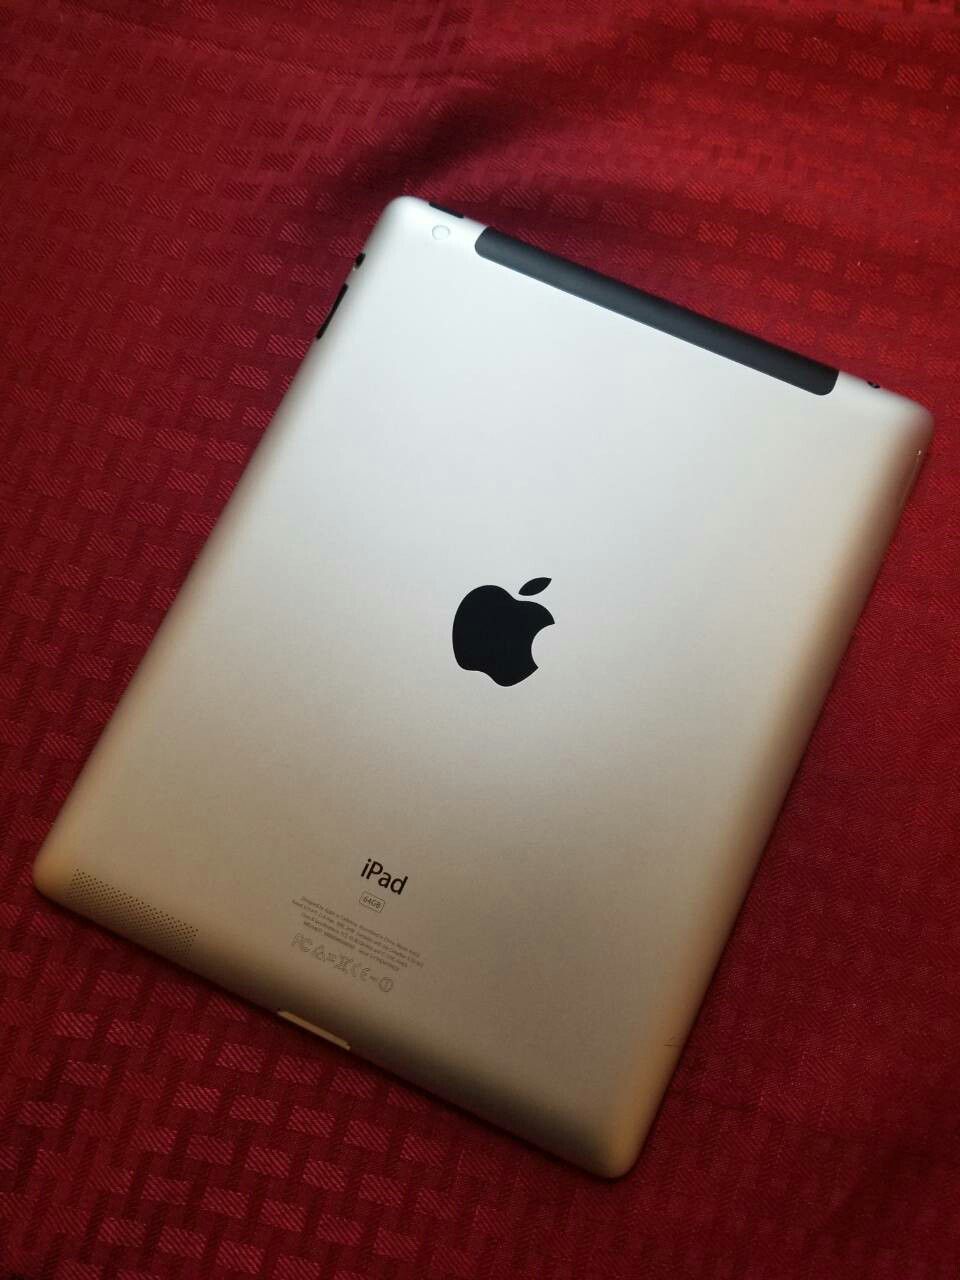 IPad 4th generation, Cellular and Wi-Fi Internet access, UNLOCKED, Usable with Wi-Fi and SIM, Excellent condition.